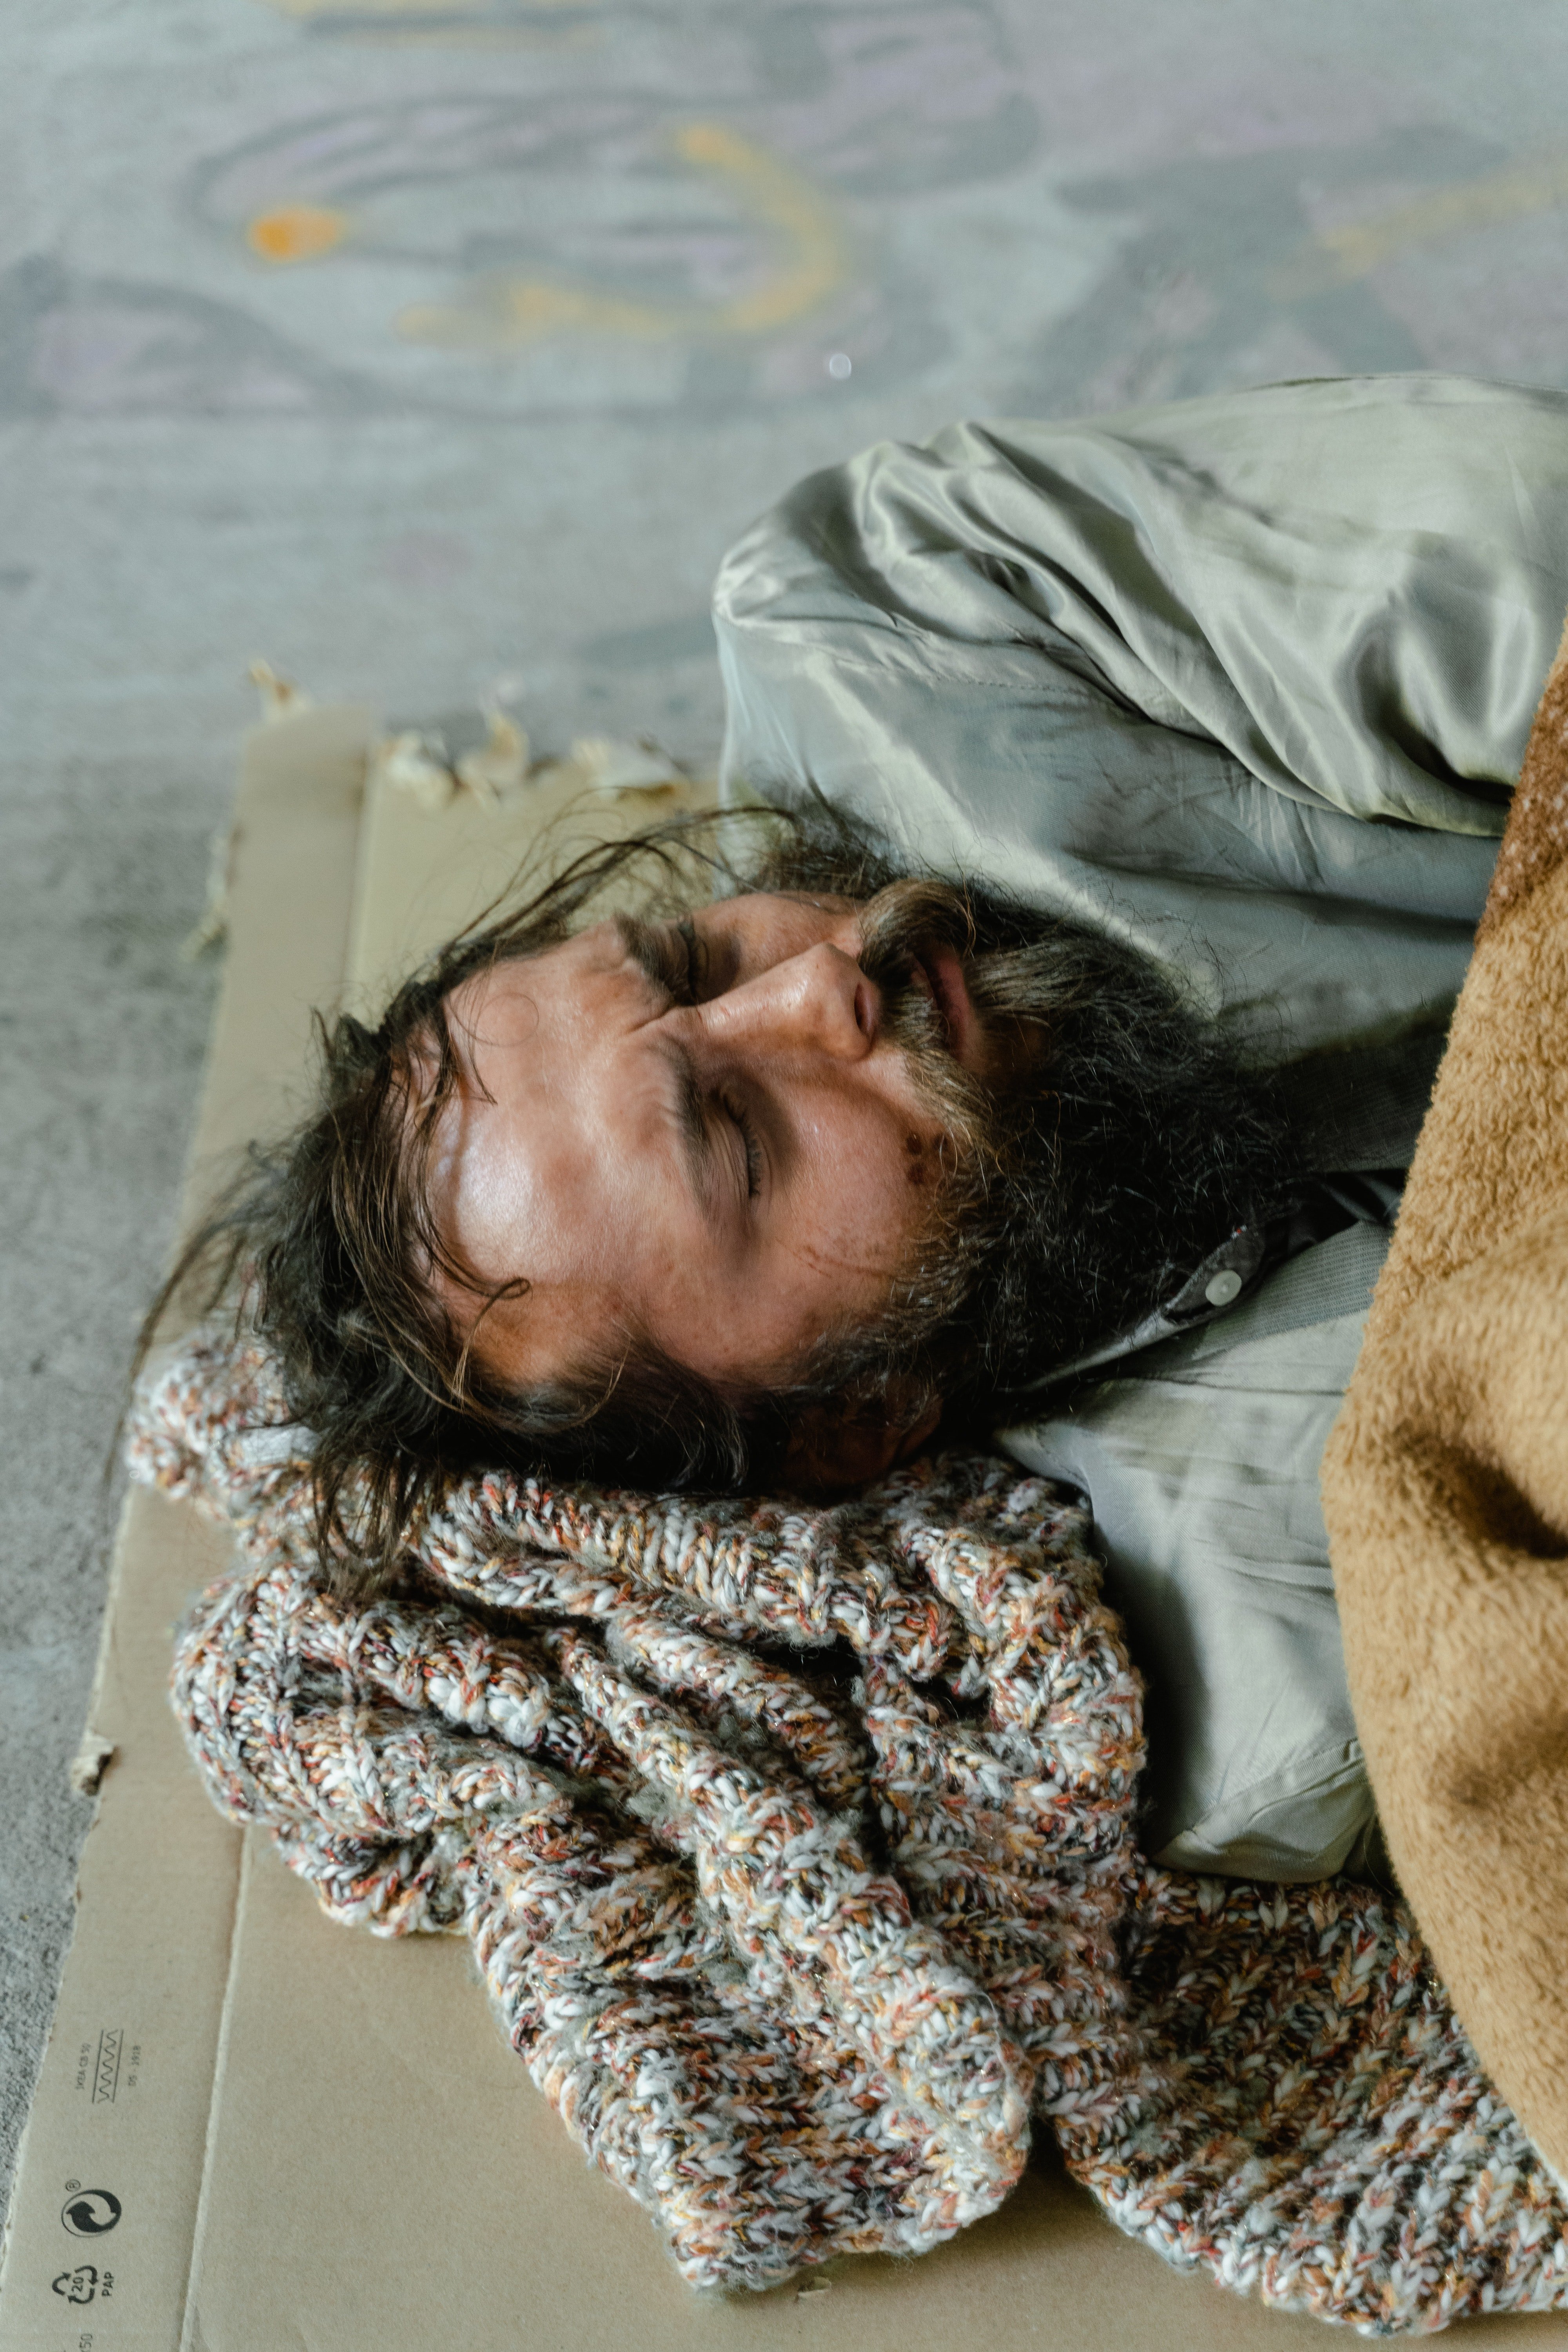 The homeless man was shivering in the cold. | Source: Pexels